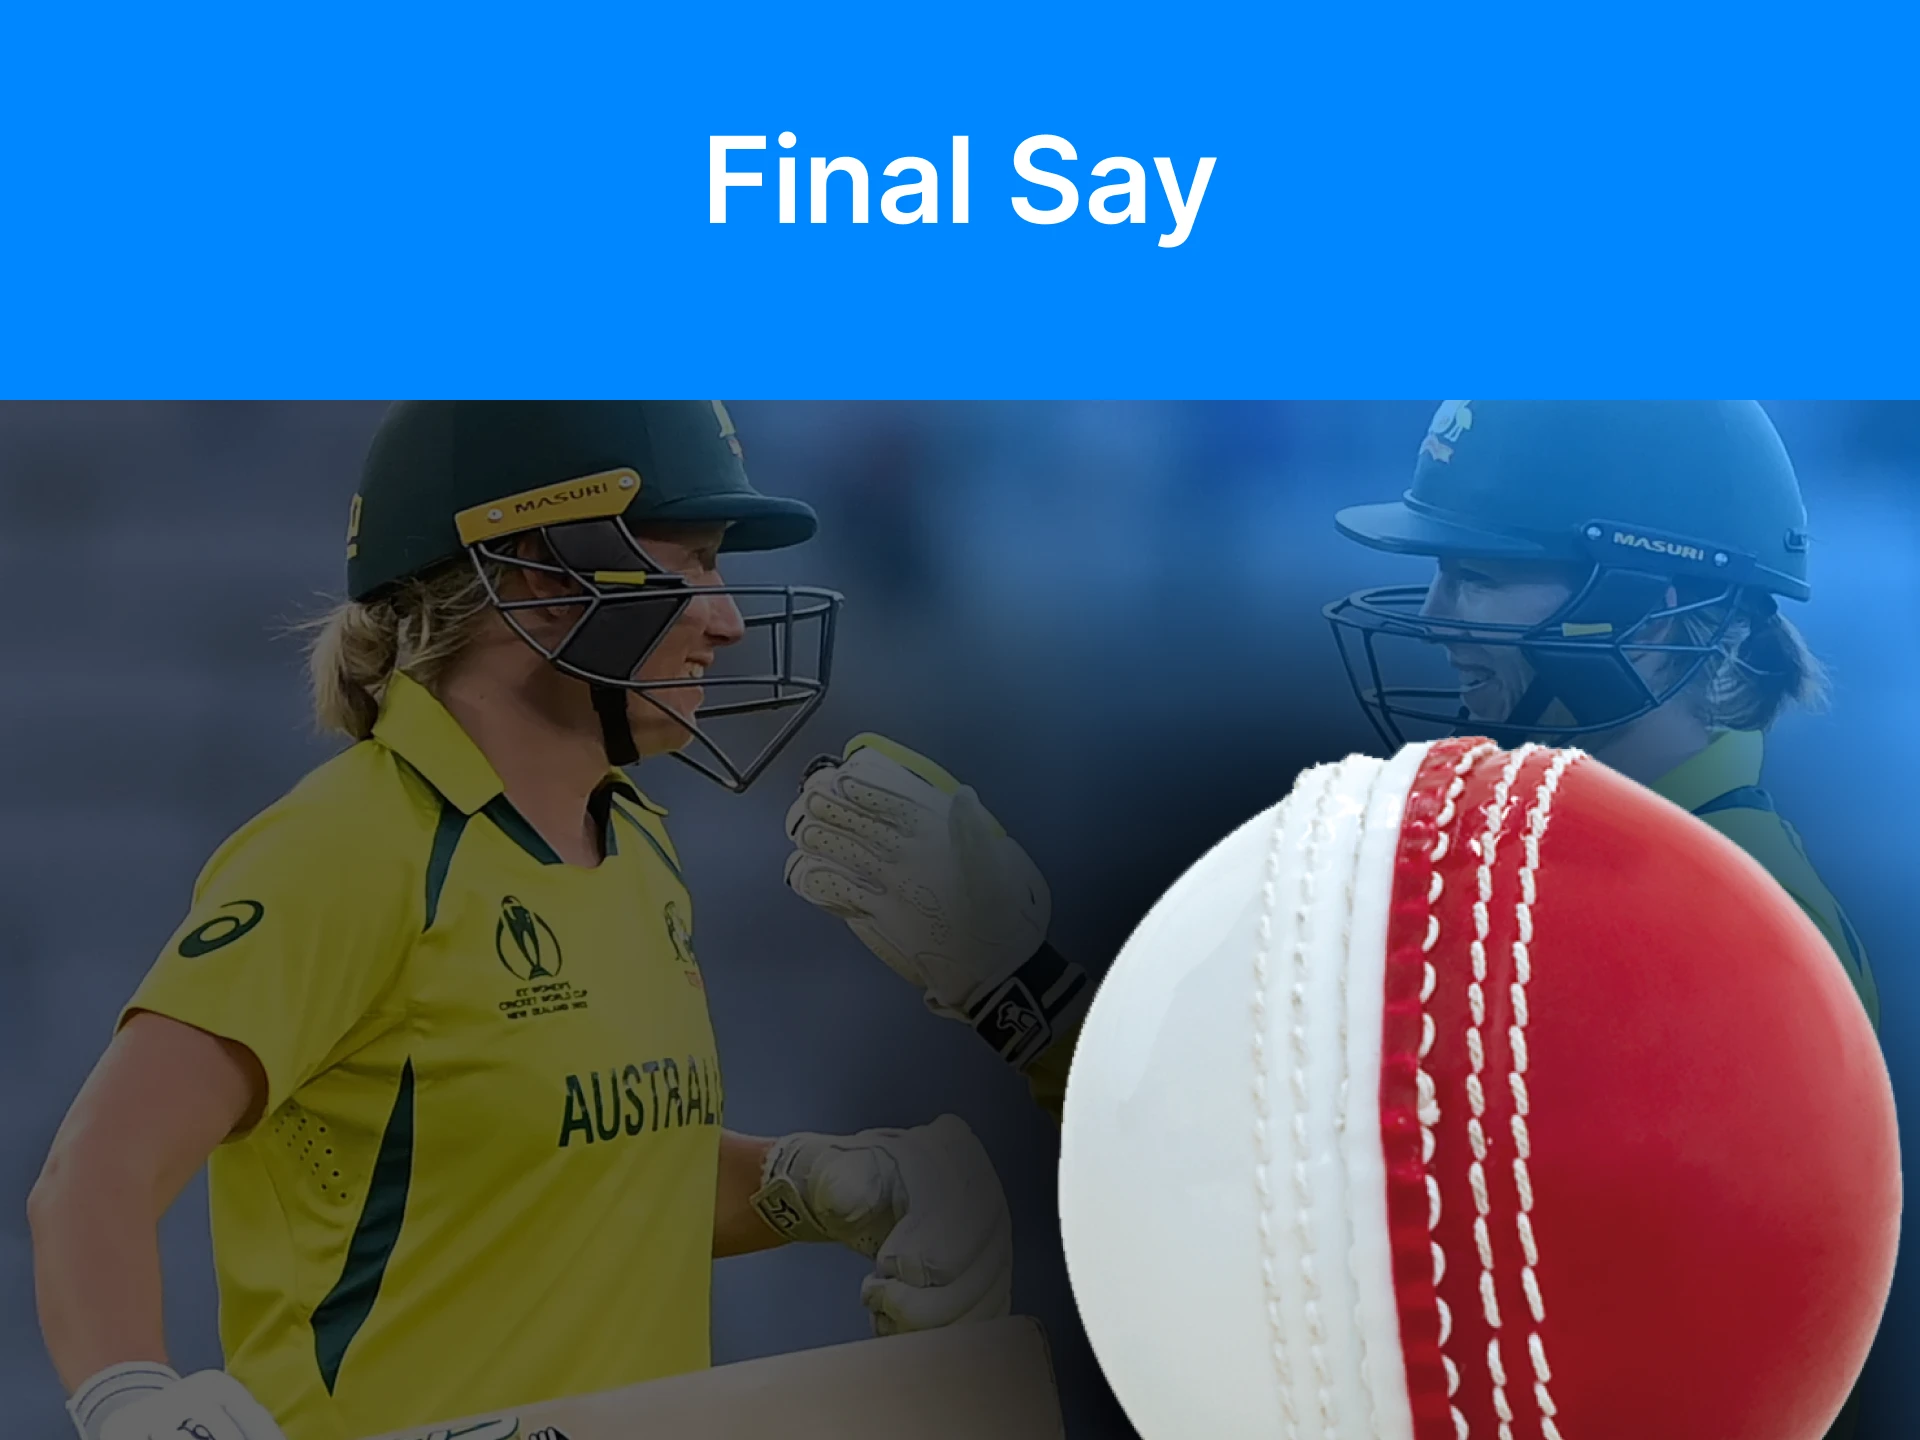 Women's Ashes series is an exciting event in the world of cricket.